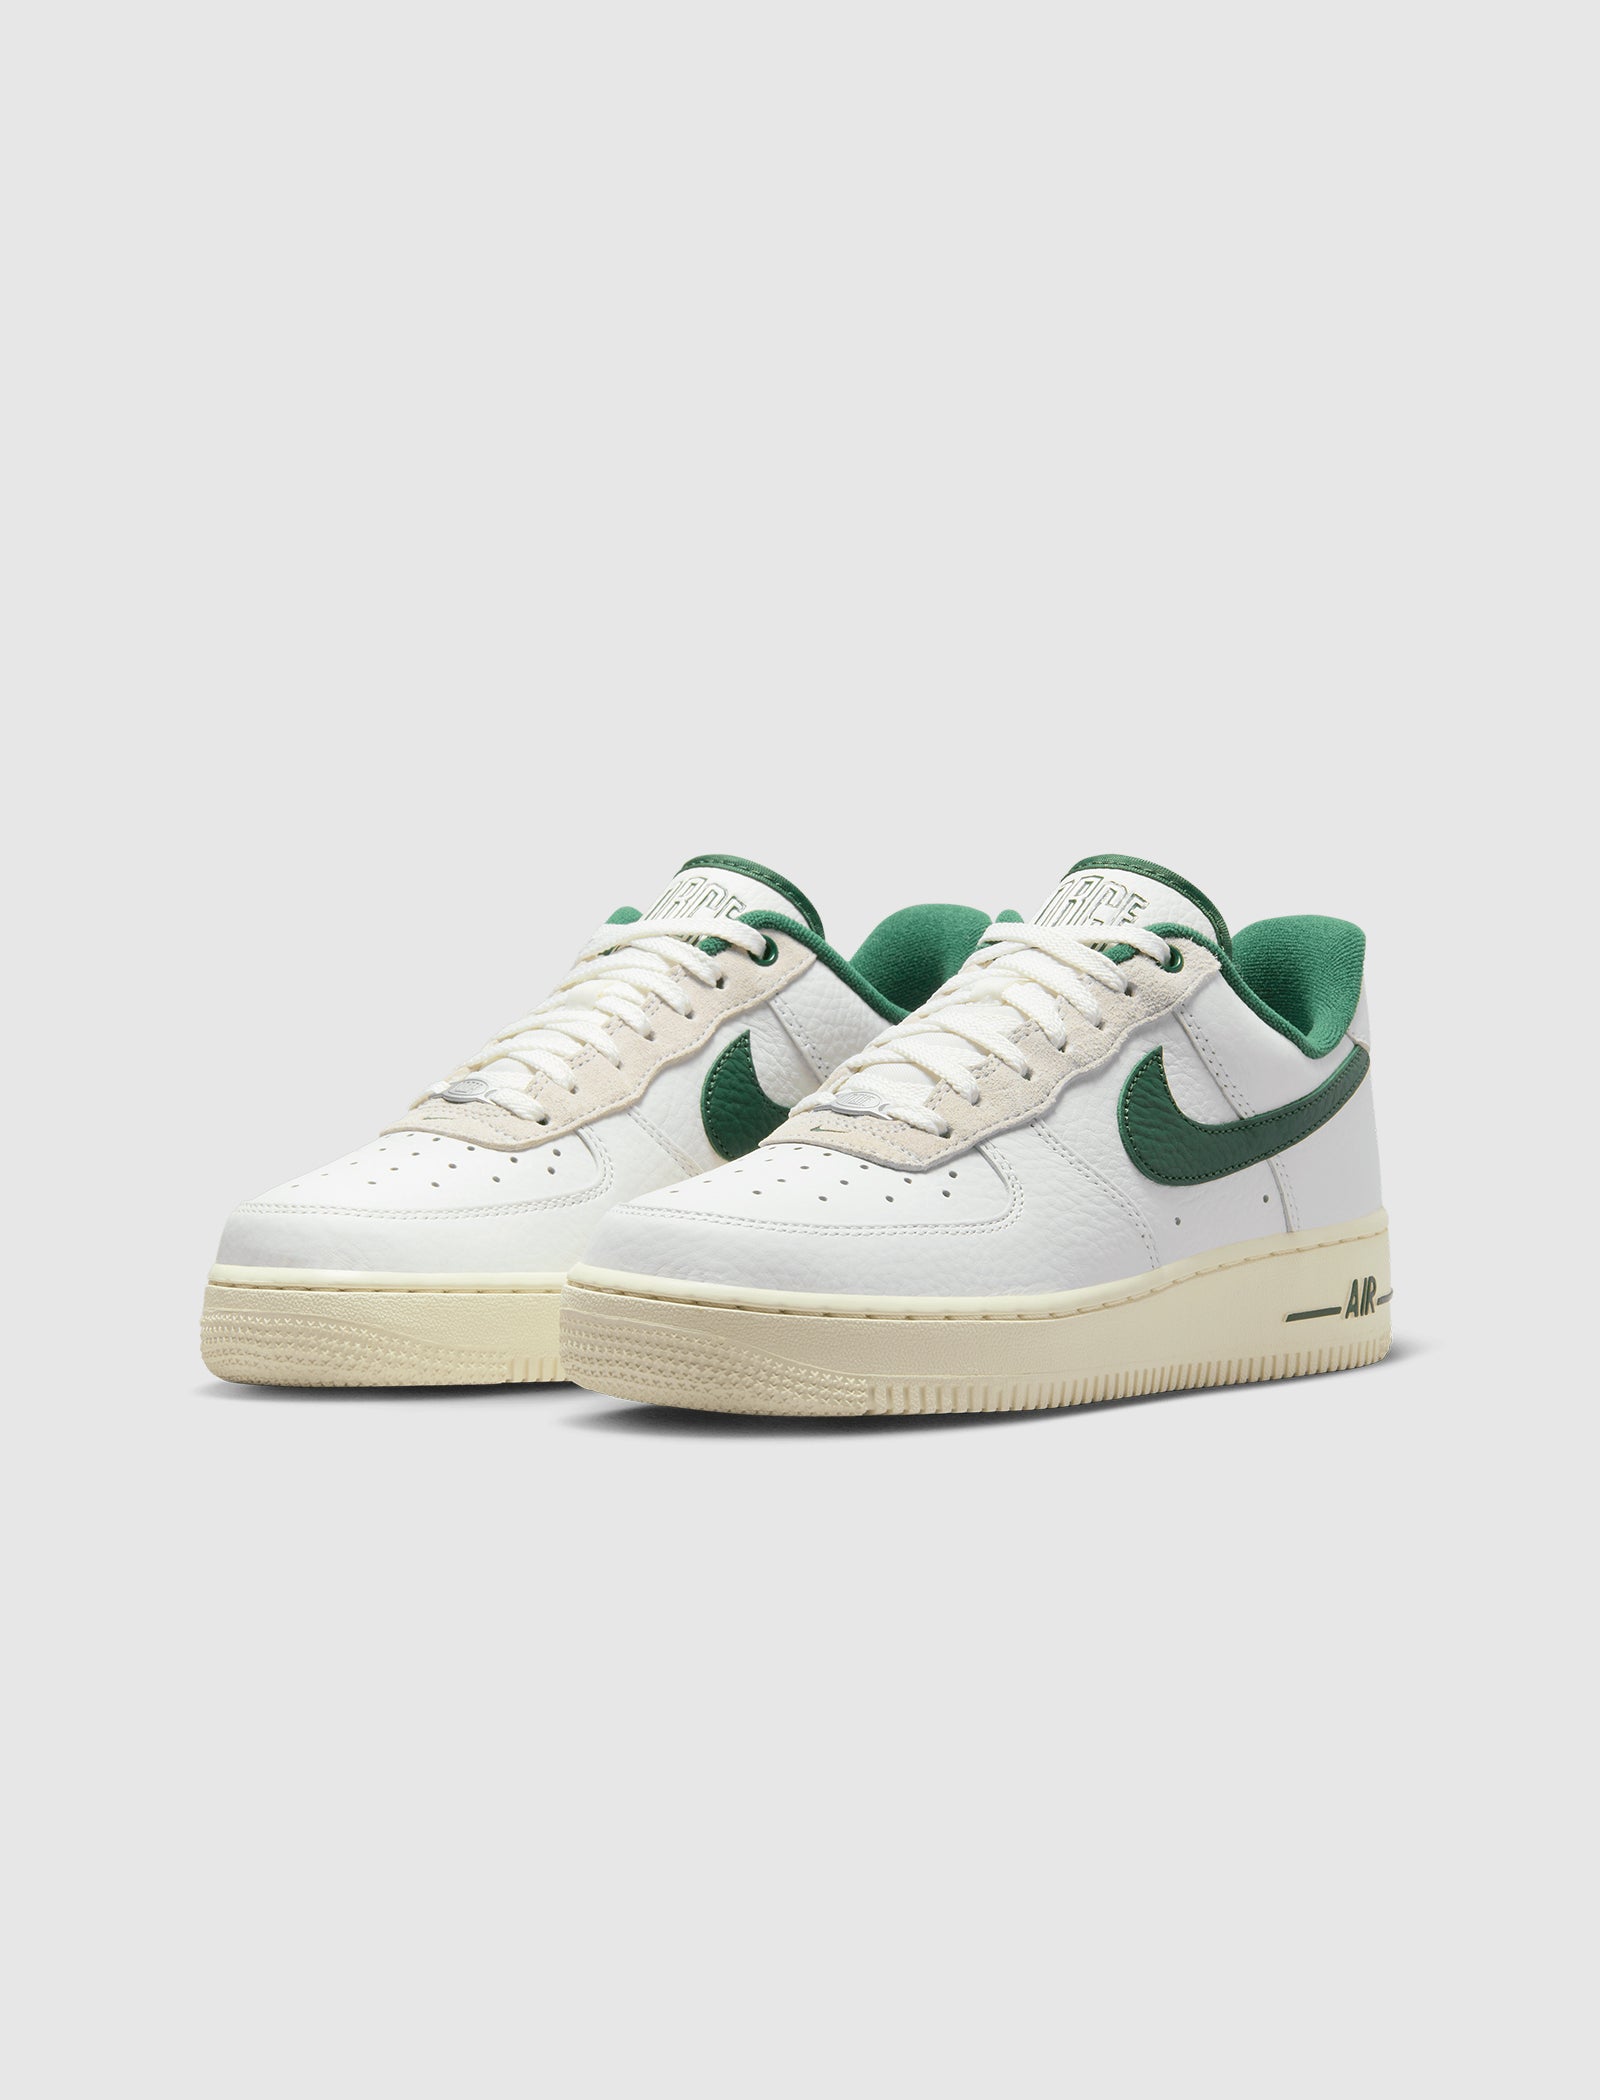 WOMEN'S AIR FORCE 1 '07 LX COMMAND FORCE "GORGE GREEN"